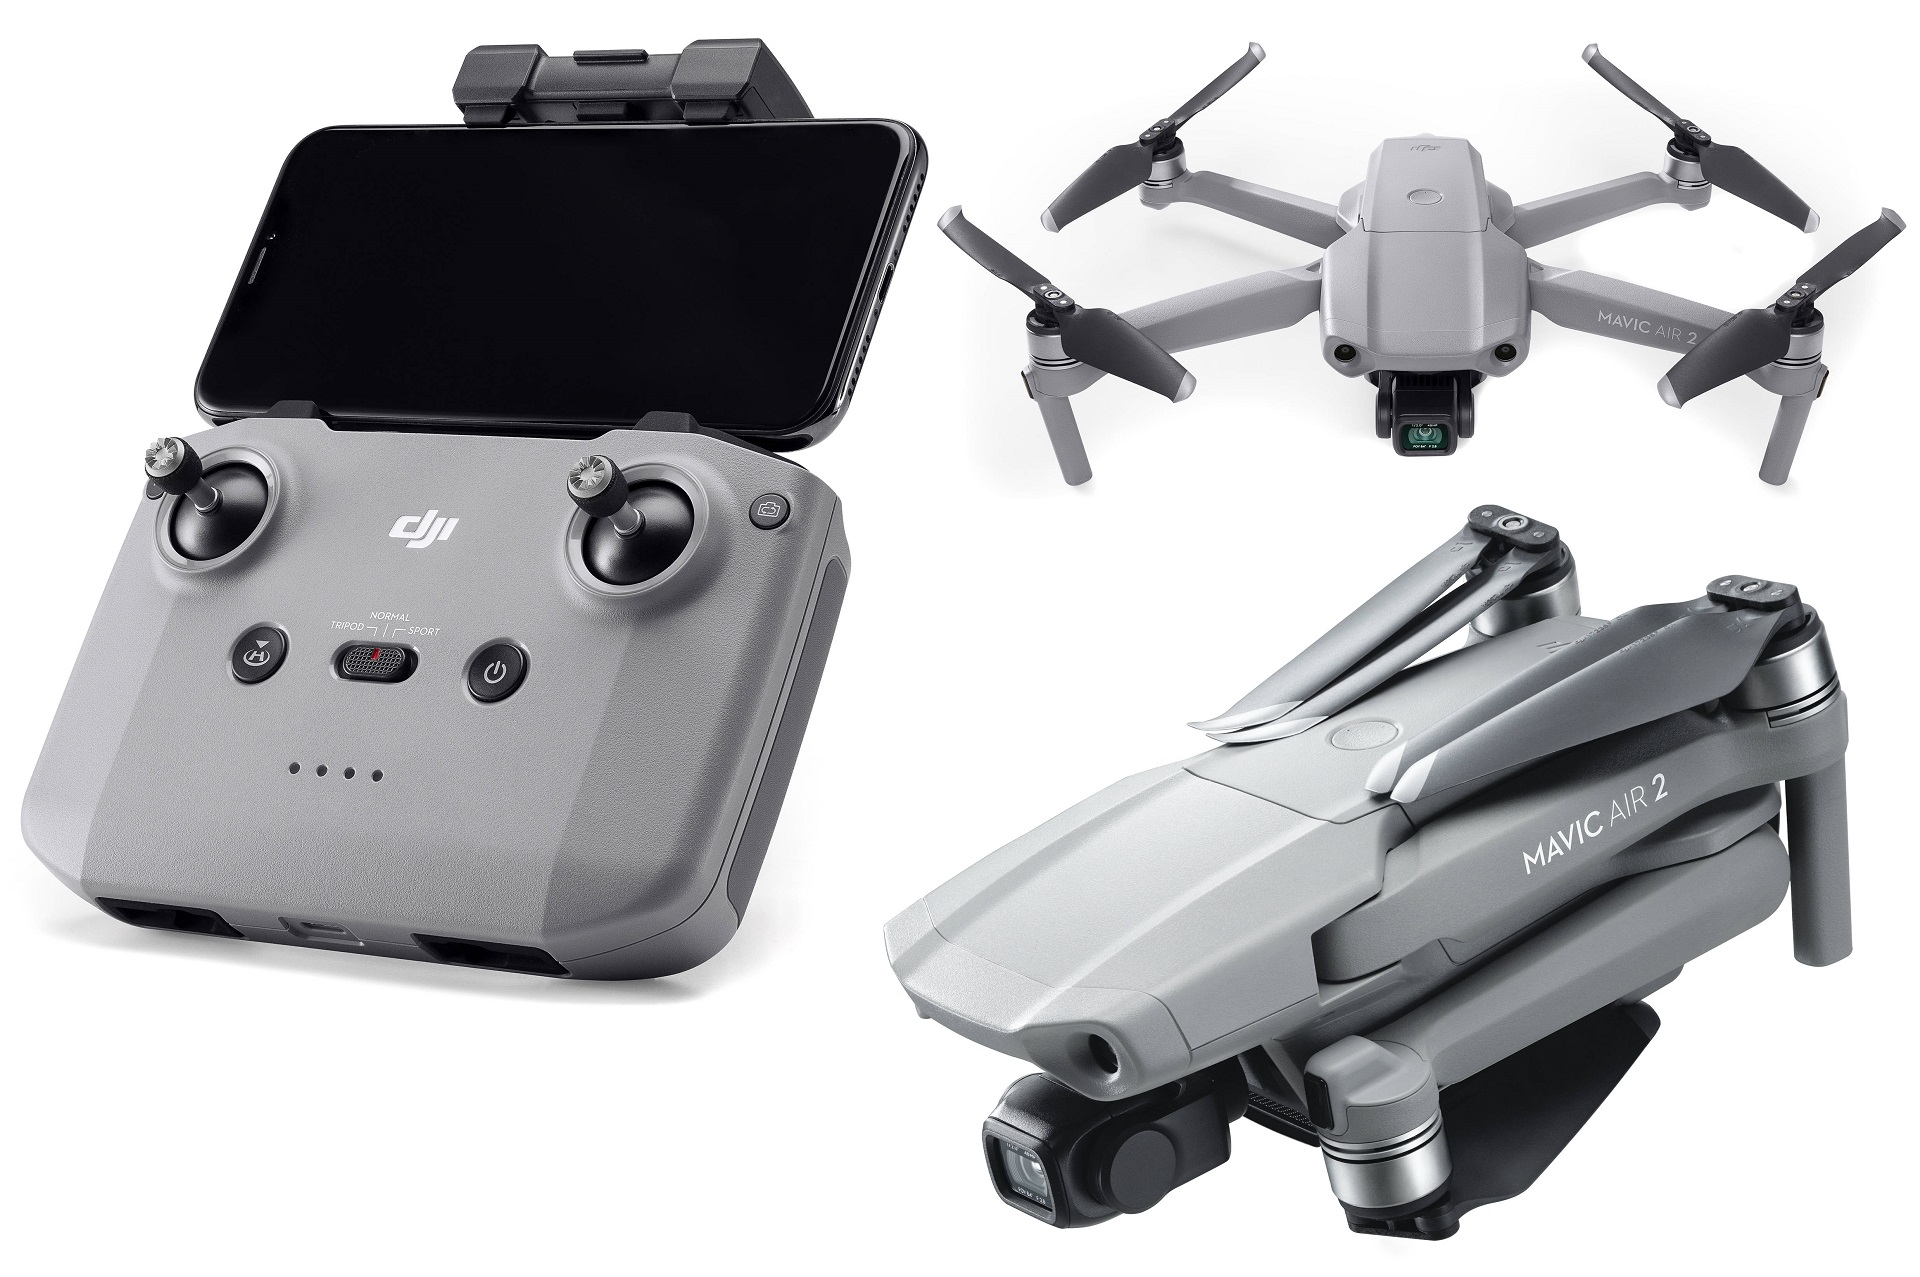 DJI Mavic Air 2 Update Released Digital Zoom, Safety Flight Mode, and